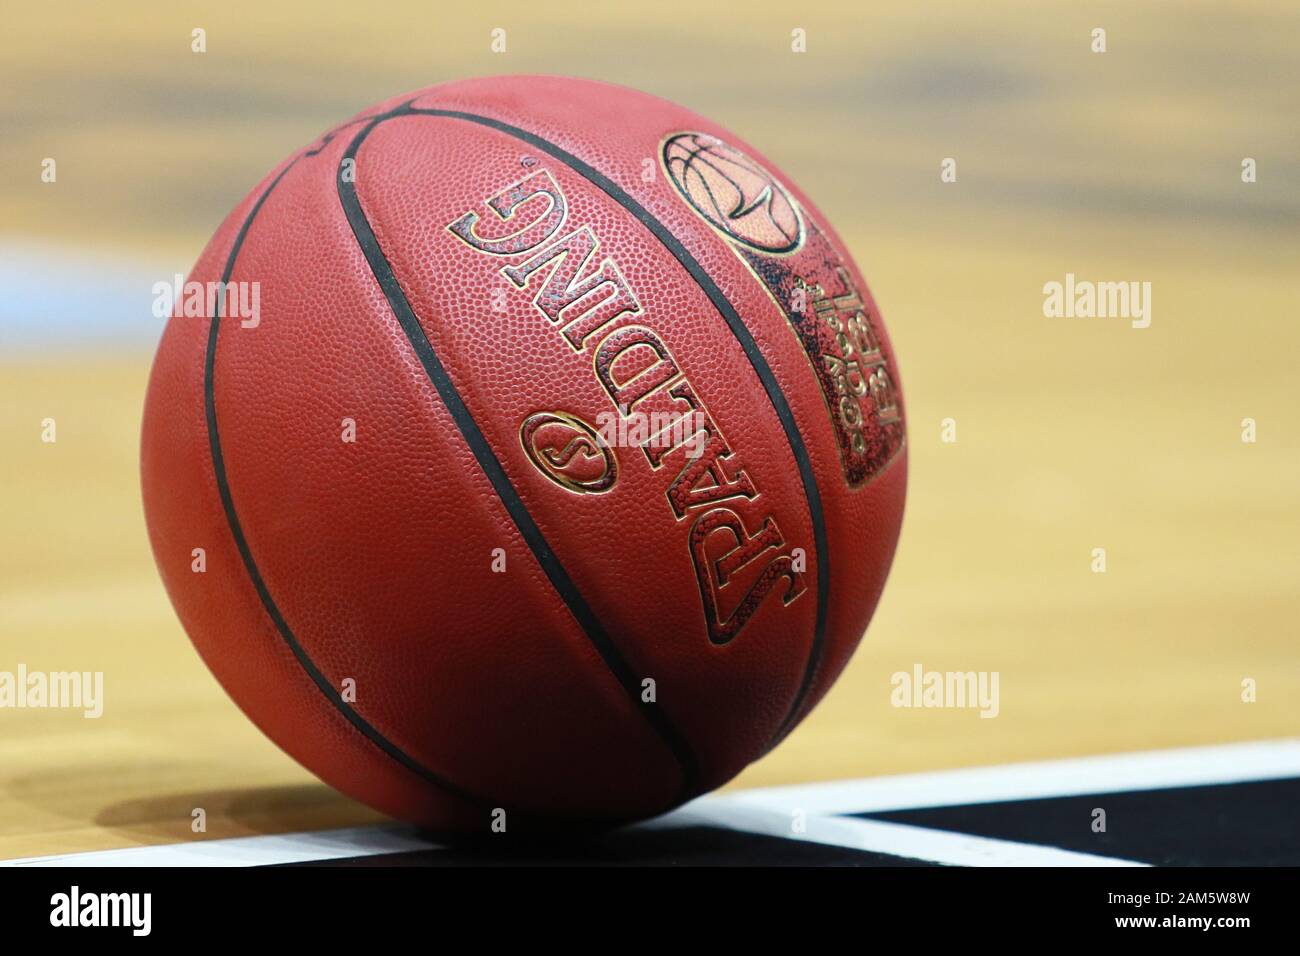 Braunschweig, Germany, December 14, 2019: German BBL official game ball during the Basketball BBL Pokal game at Volkswagen Halle Stock Photo